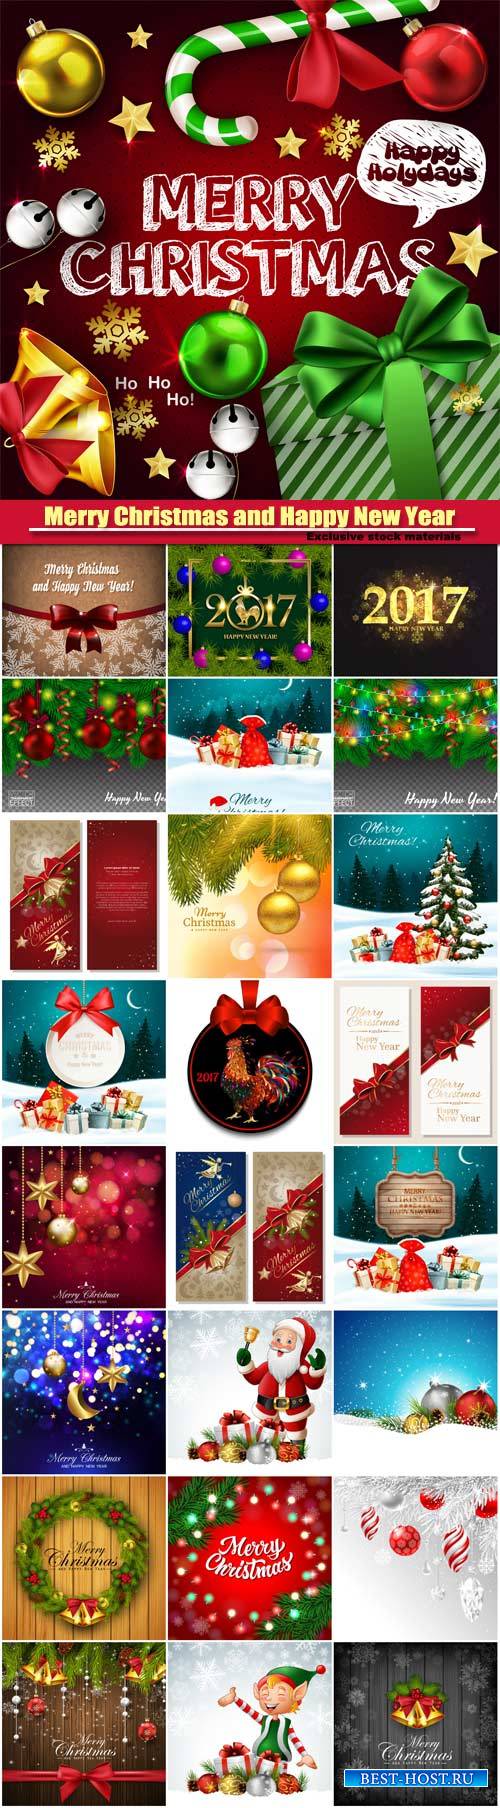 Merry Christmas and Happy New Year vector, greeting cards, leaflets and brochures